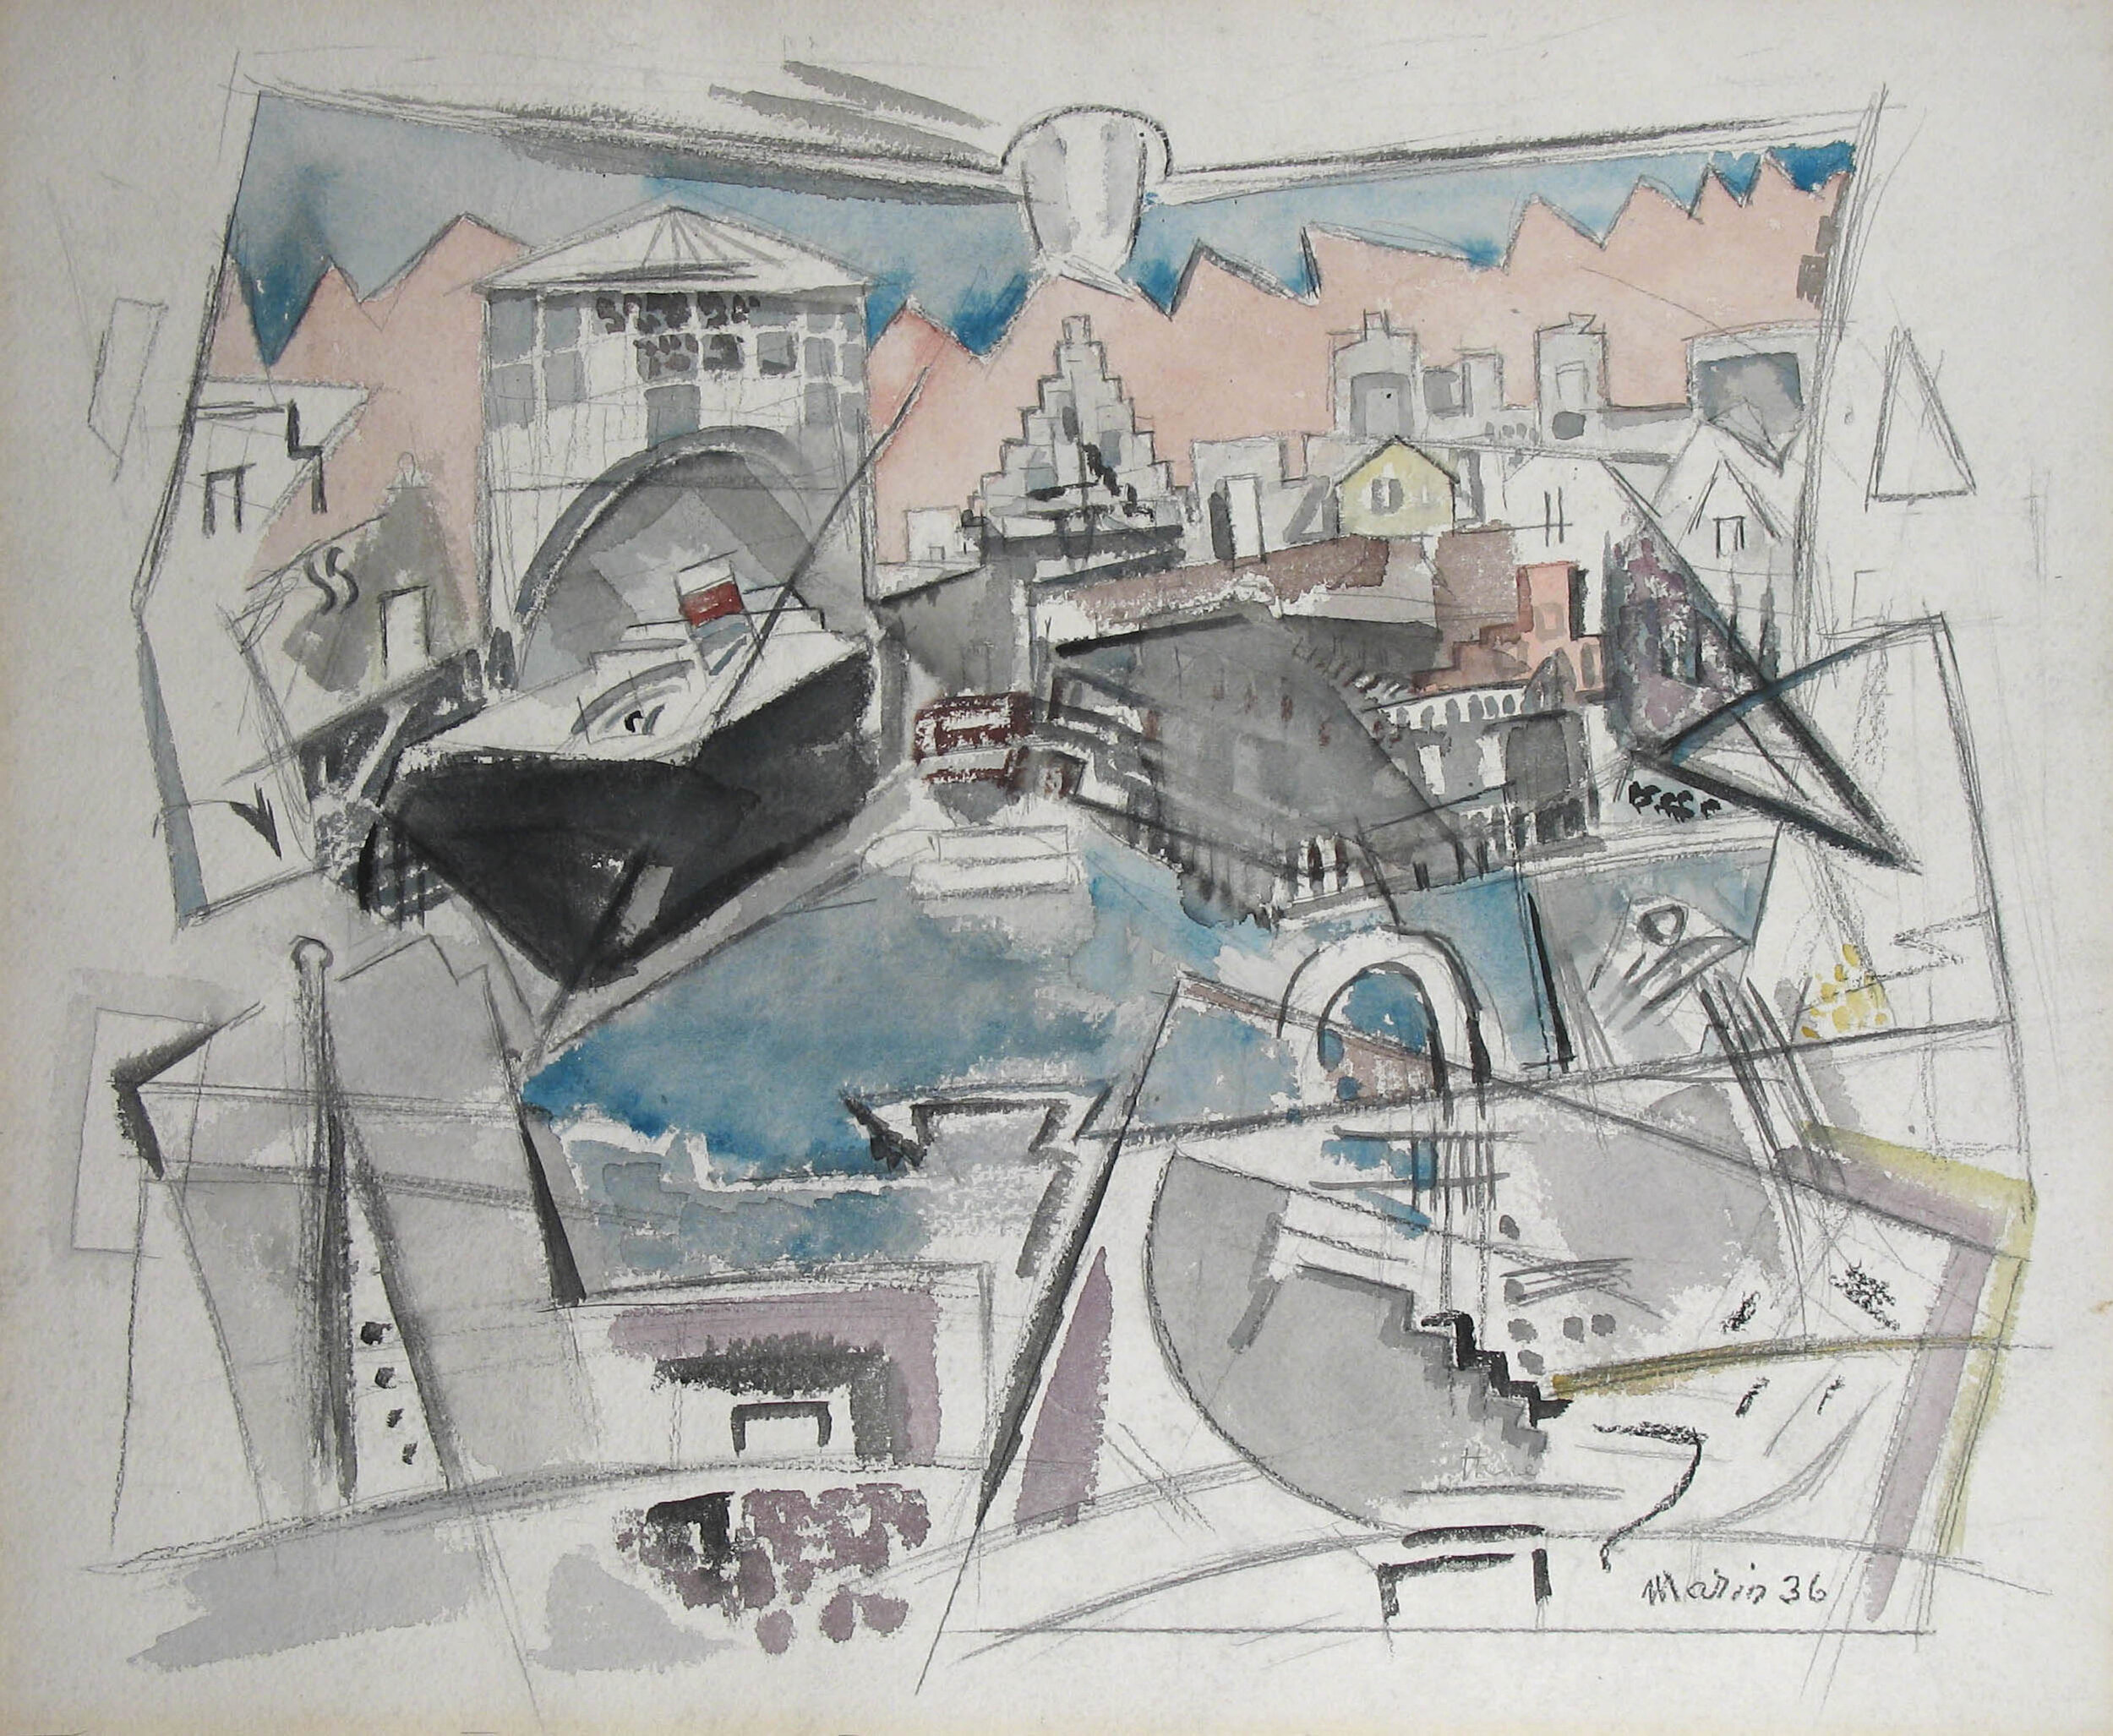 Telling Stories: # Edith Halpert &amp; Her Artists # October 9 - December 18, 2020 &lt;alt="Abstract watercolor in blue, grey, and pink of Manhattan waterfront with buildings and ship"&gt;